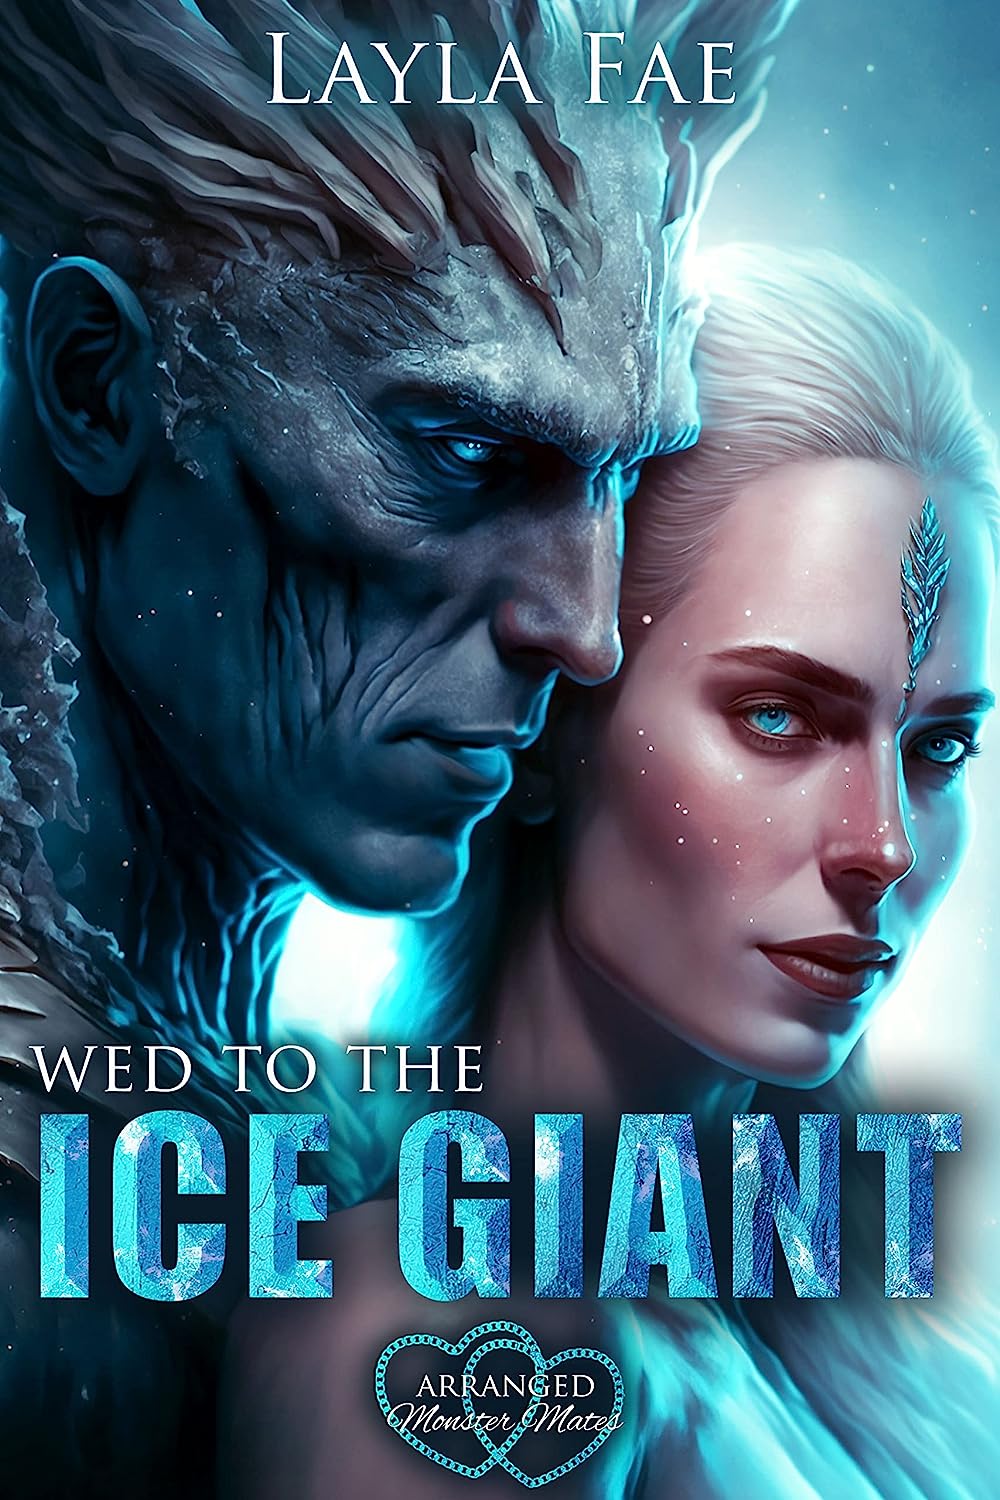 Wed to the Ice Giant Arranged Monster Mates